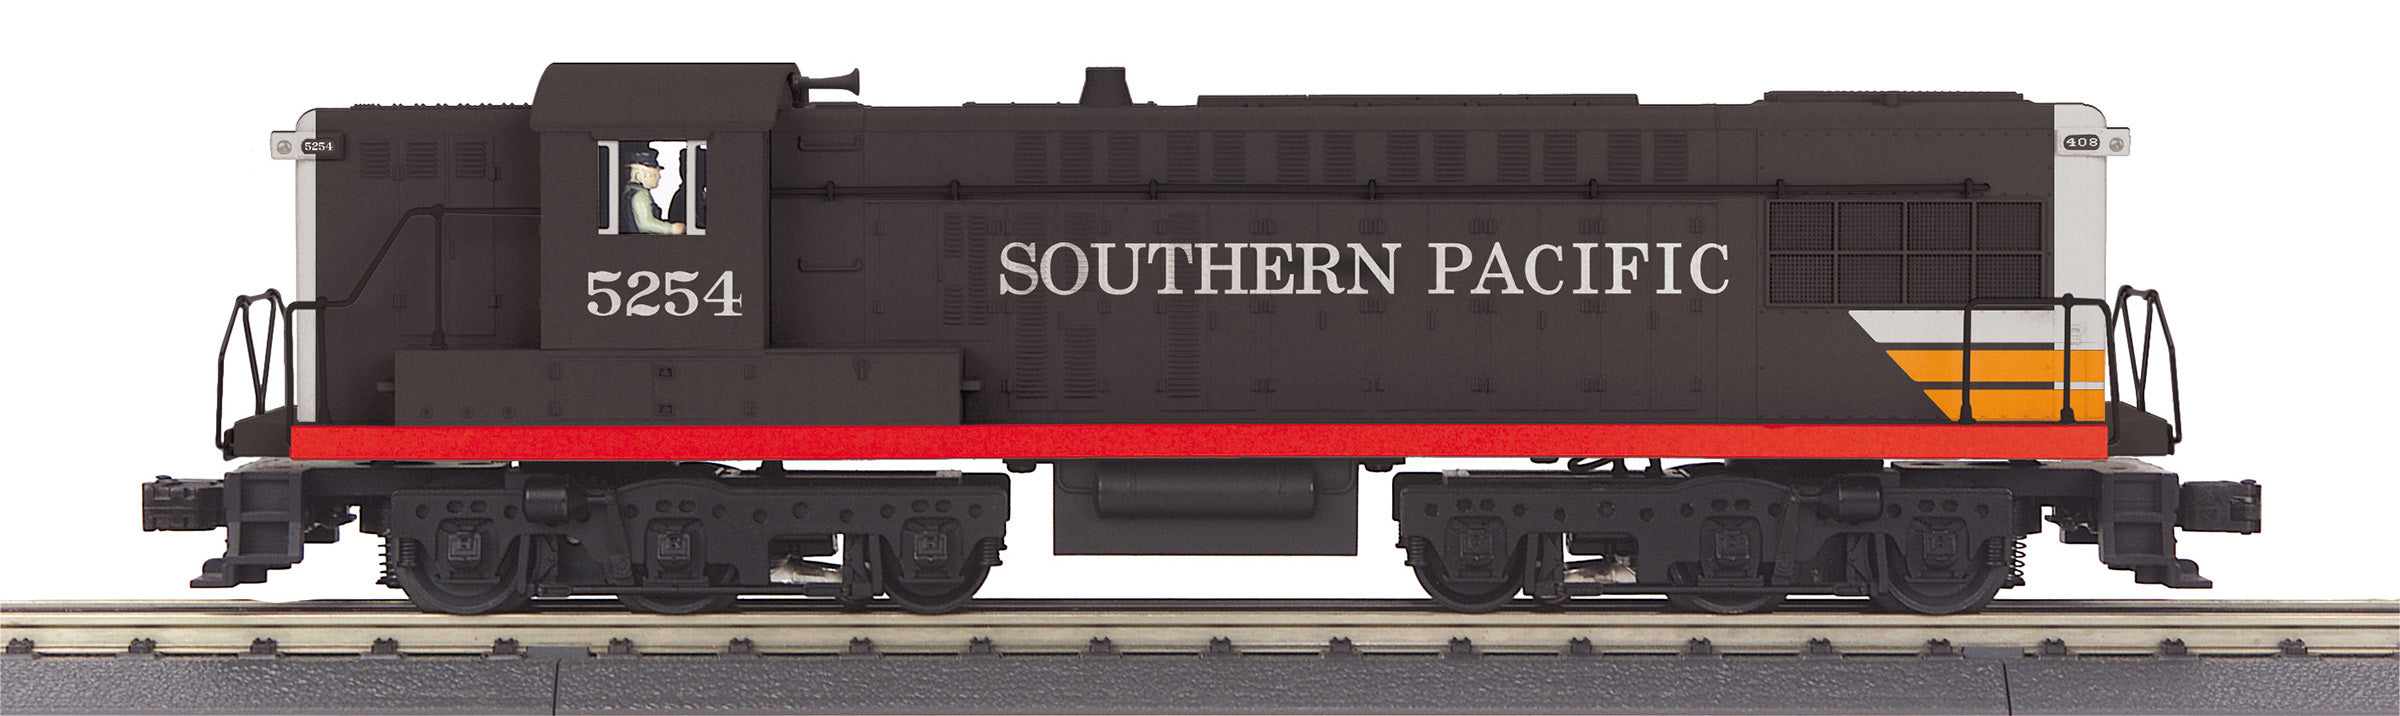 MTH 30-20885-1 - AS-616 Diesel Engine "Southern Pacific" w/ PS3 #5254